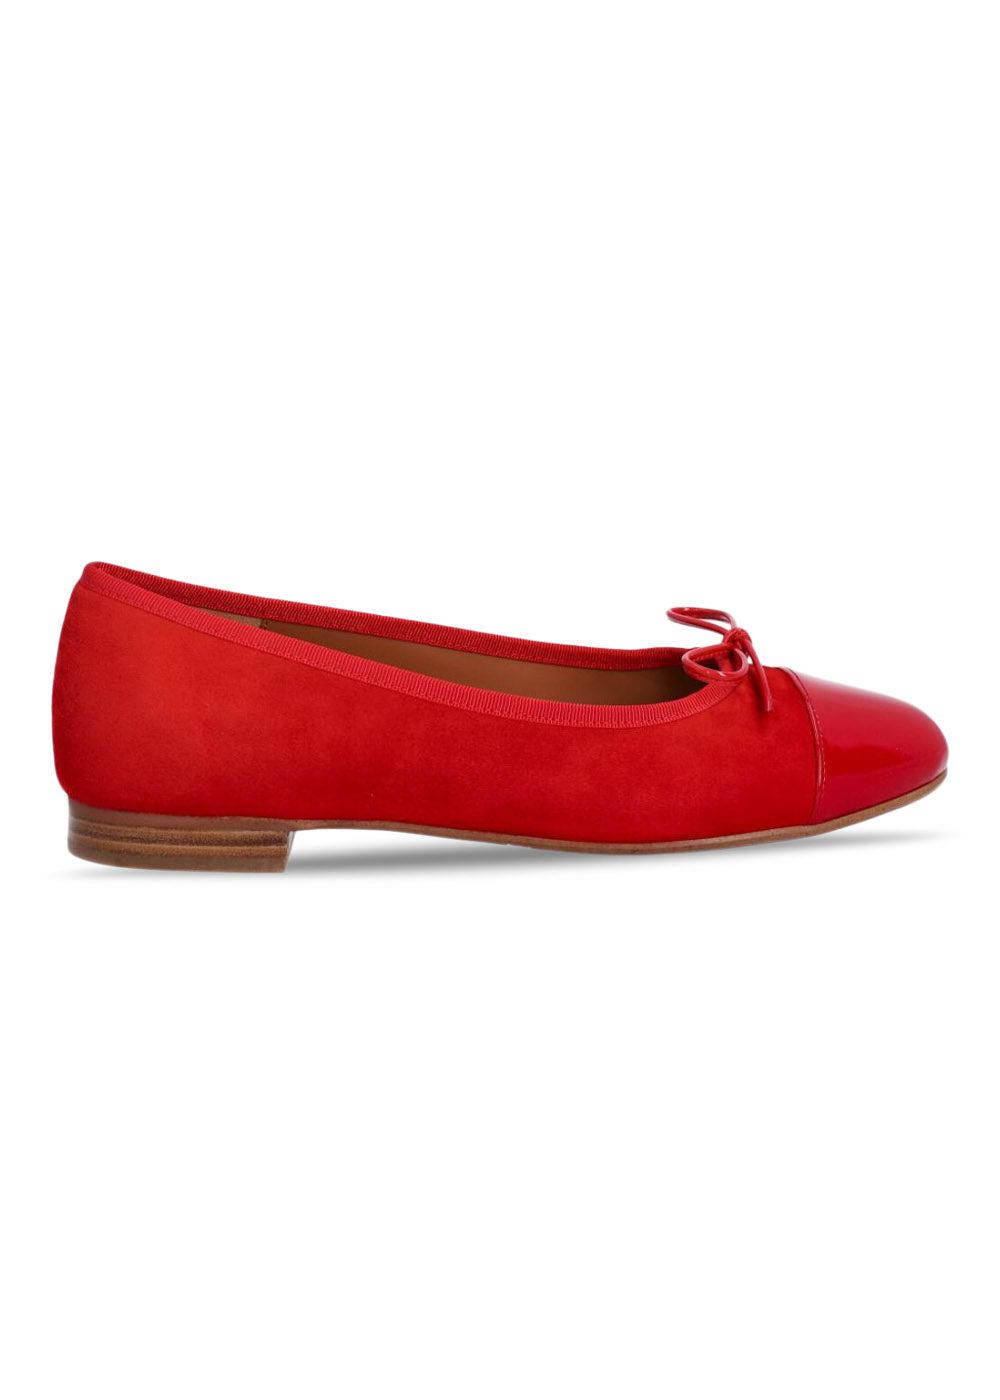 A6021 - Red Patent/Suede 259